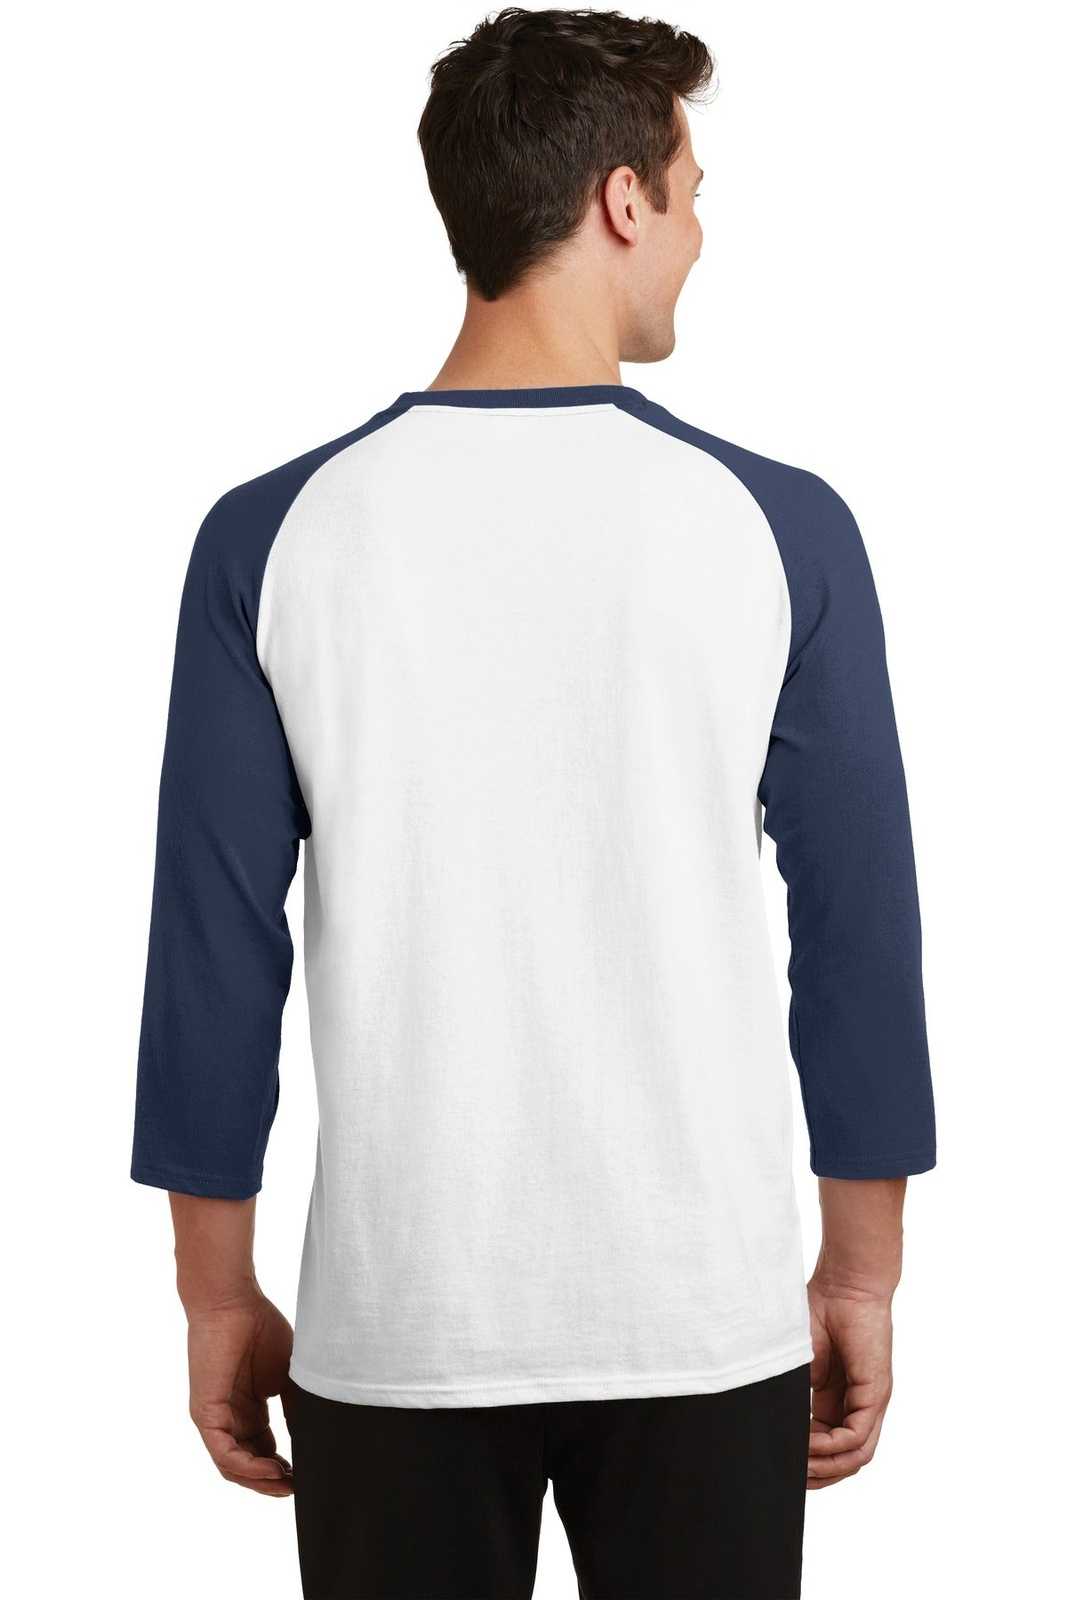 Port &amp; Company PC55RS Core Blend 3/4-Sleeve Raglan Tee - White Navy - HIT a Double - 2